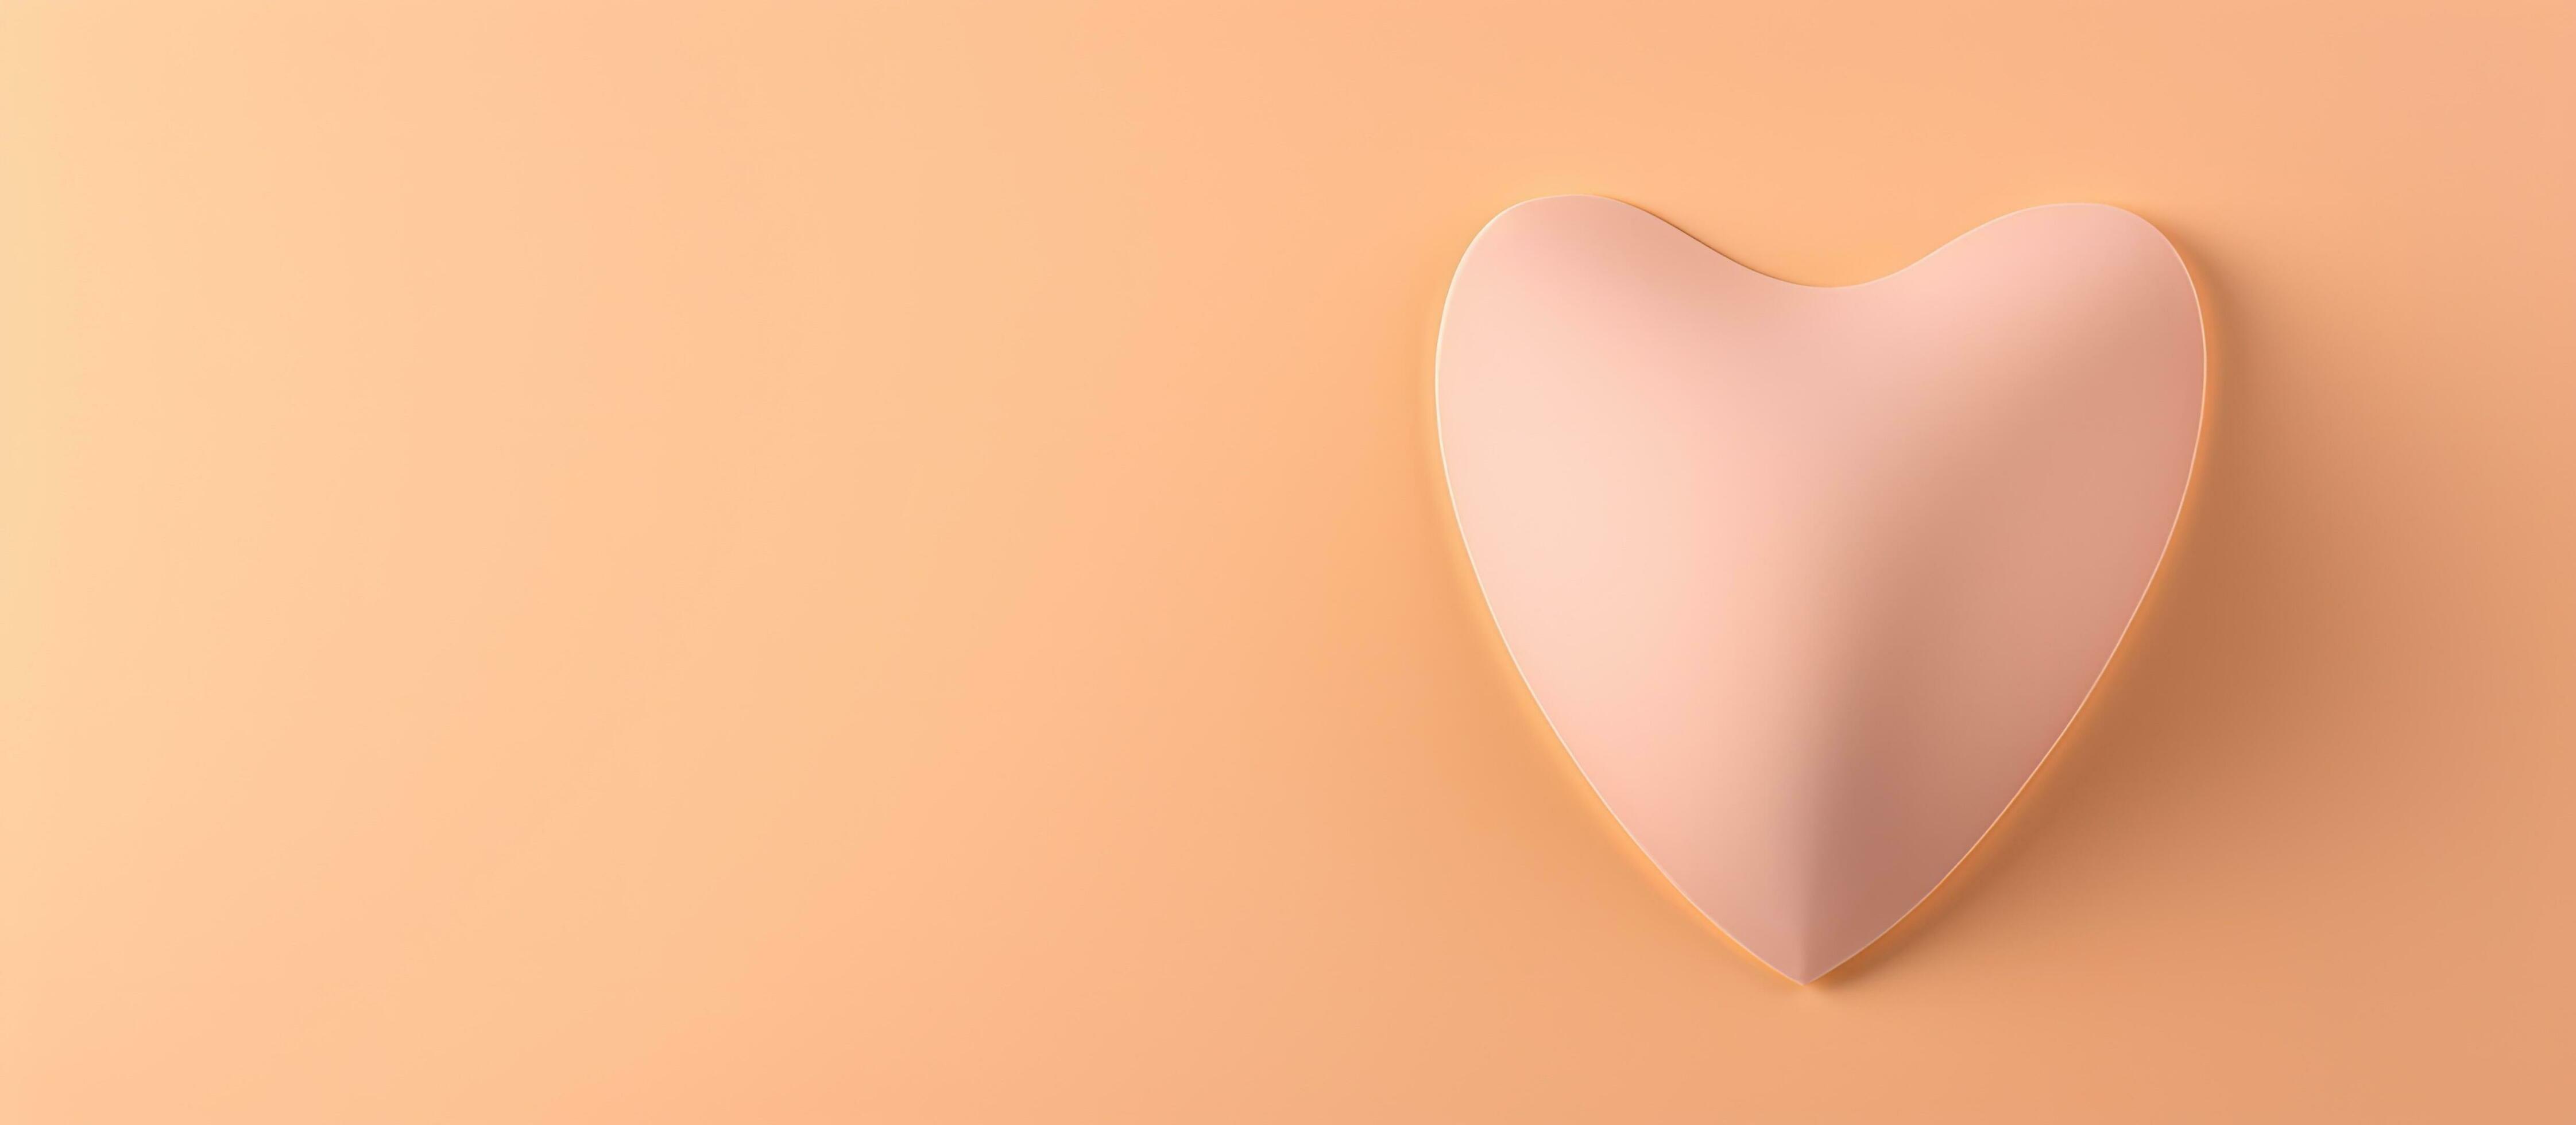 A pink heart shaped object on a pink background photo – Heart